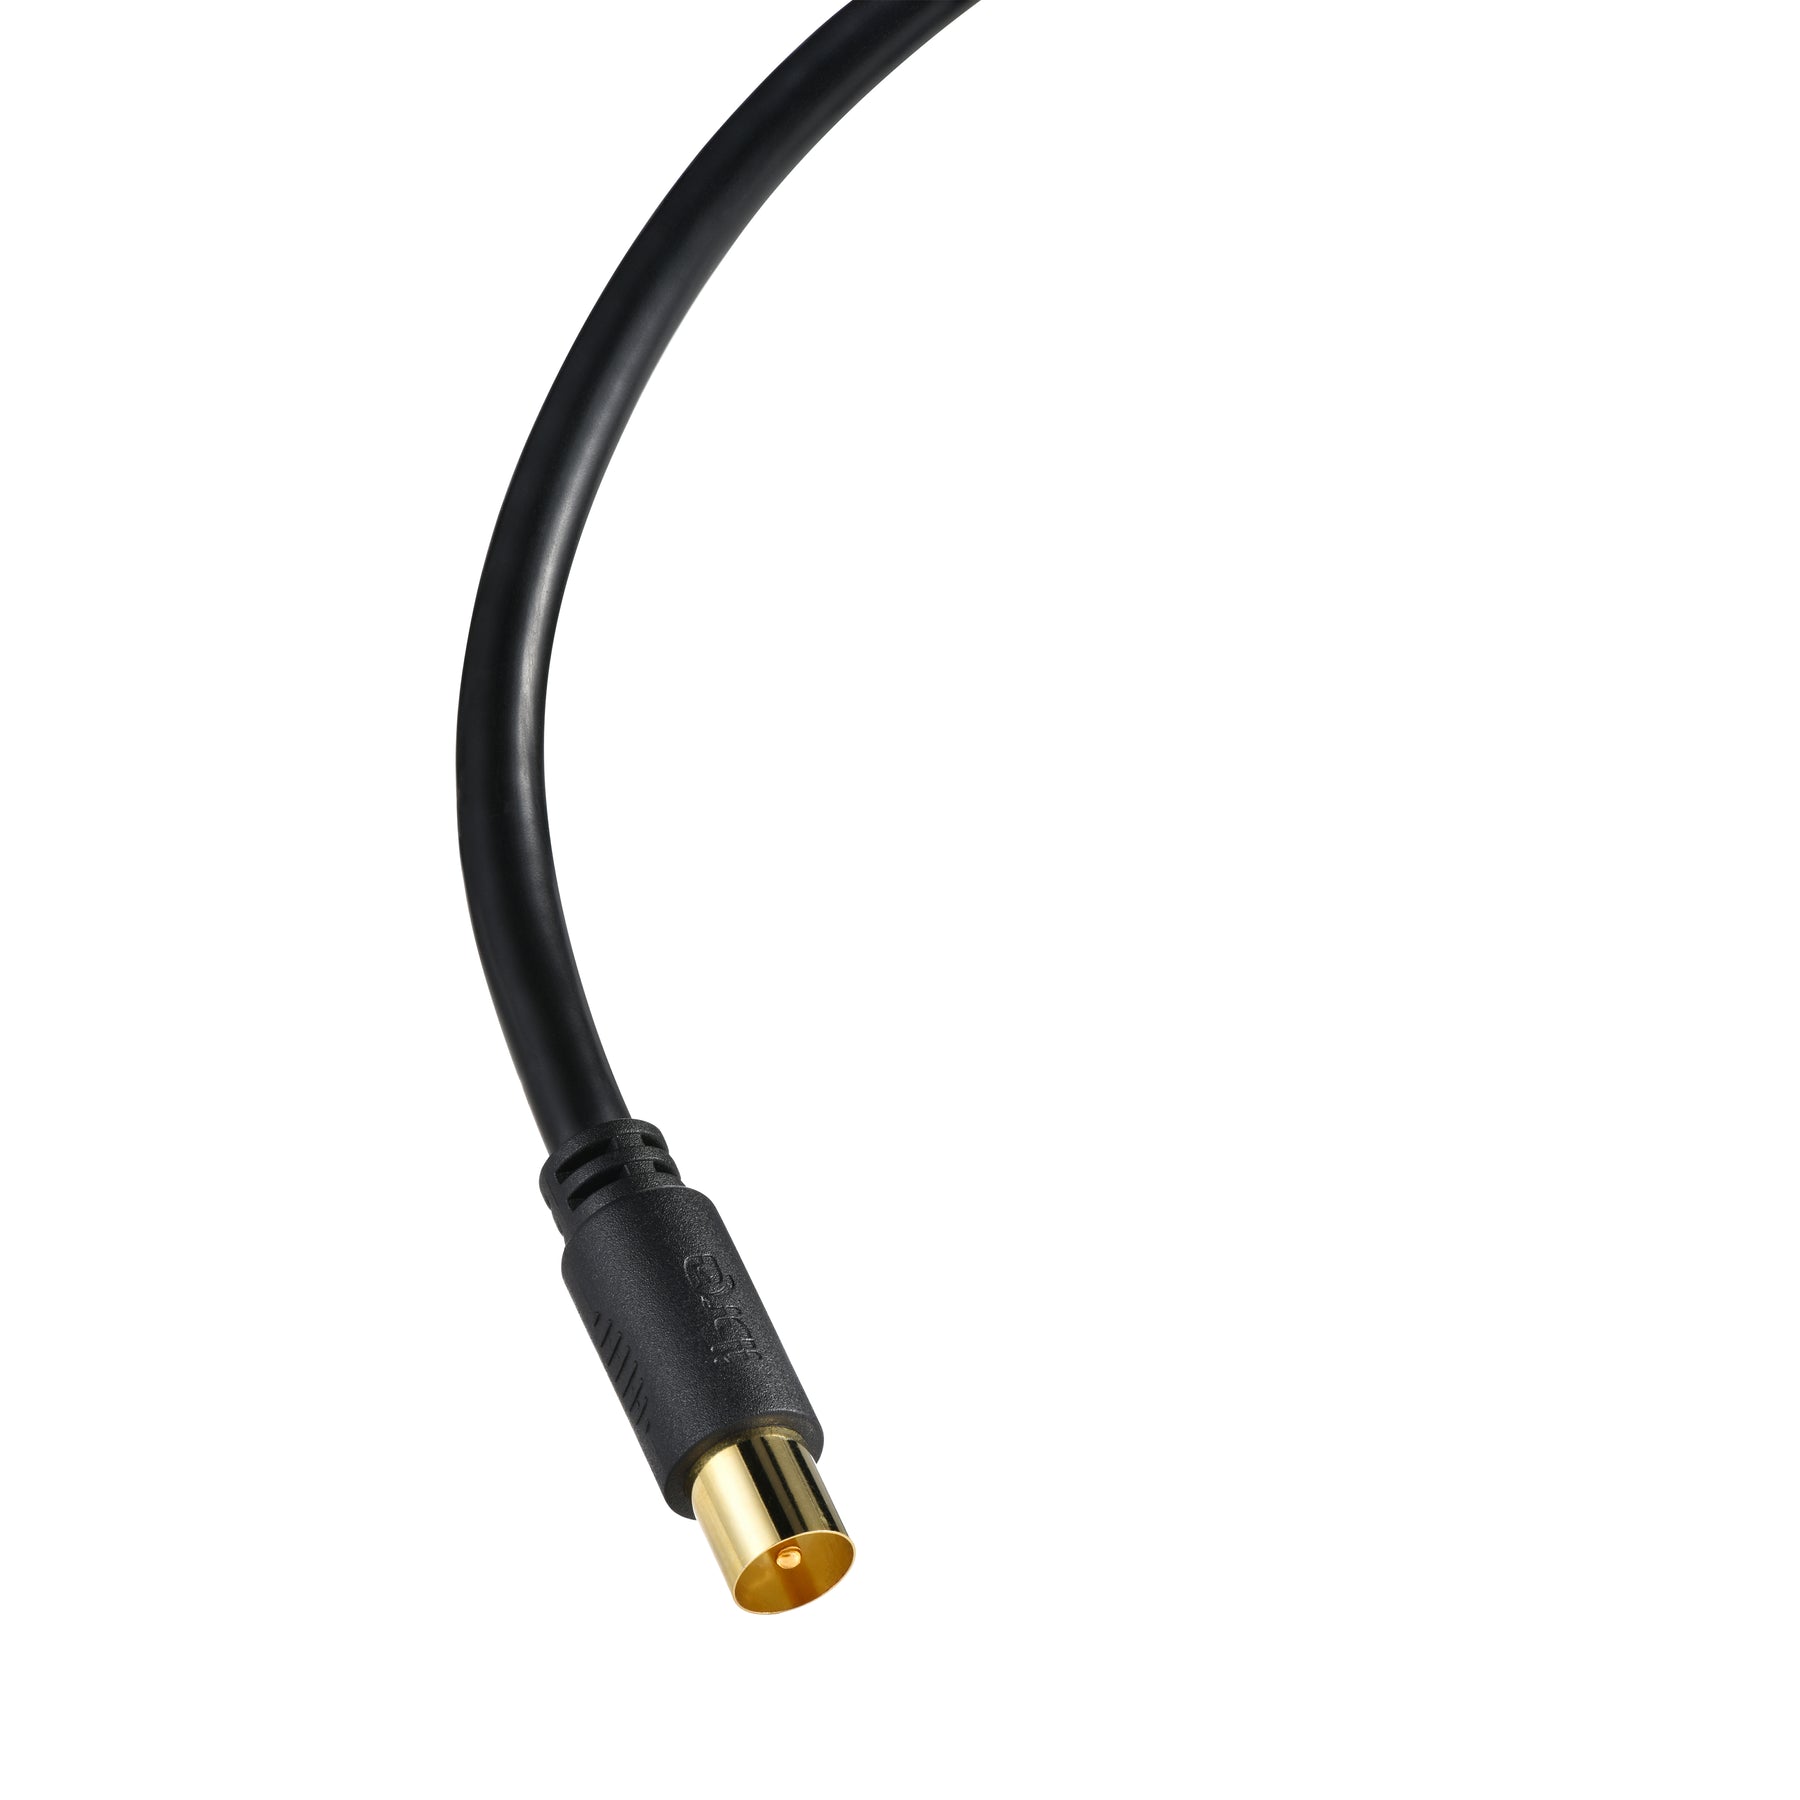 IBRA Aerial Coaxial Cable 0.75M with Gold-Plated Connectors, Male to Male RF Coax Lead with Female Adapter Coupler for Freeview, Freesat, Sky, Virgin, BT, You View, Satellite TV - Black